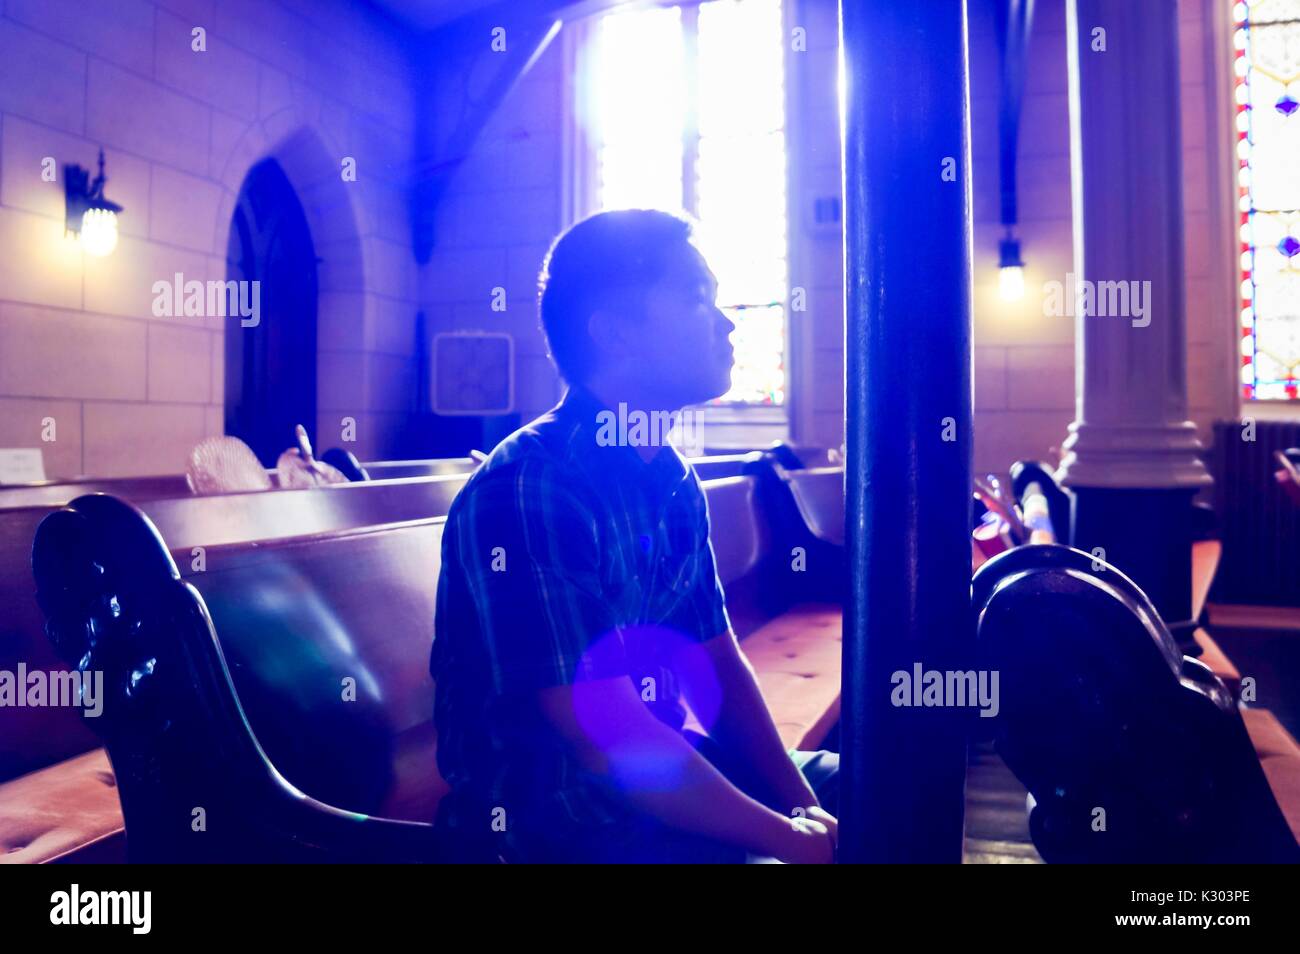 A young man sitting on a pew in a well lit church with stained glass windows at the Baltimore Book Festival, Baltimore, Maryland, September, 2013. Stock Photo